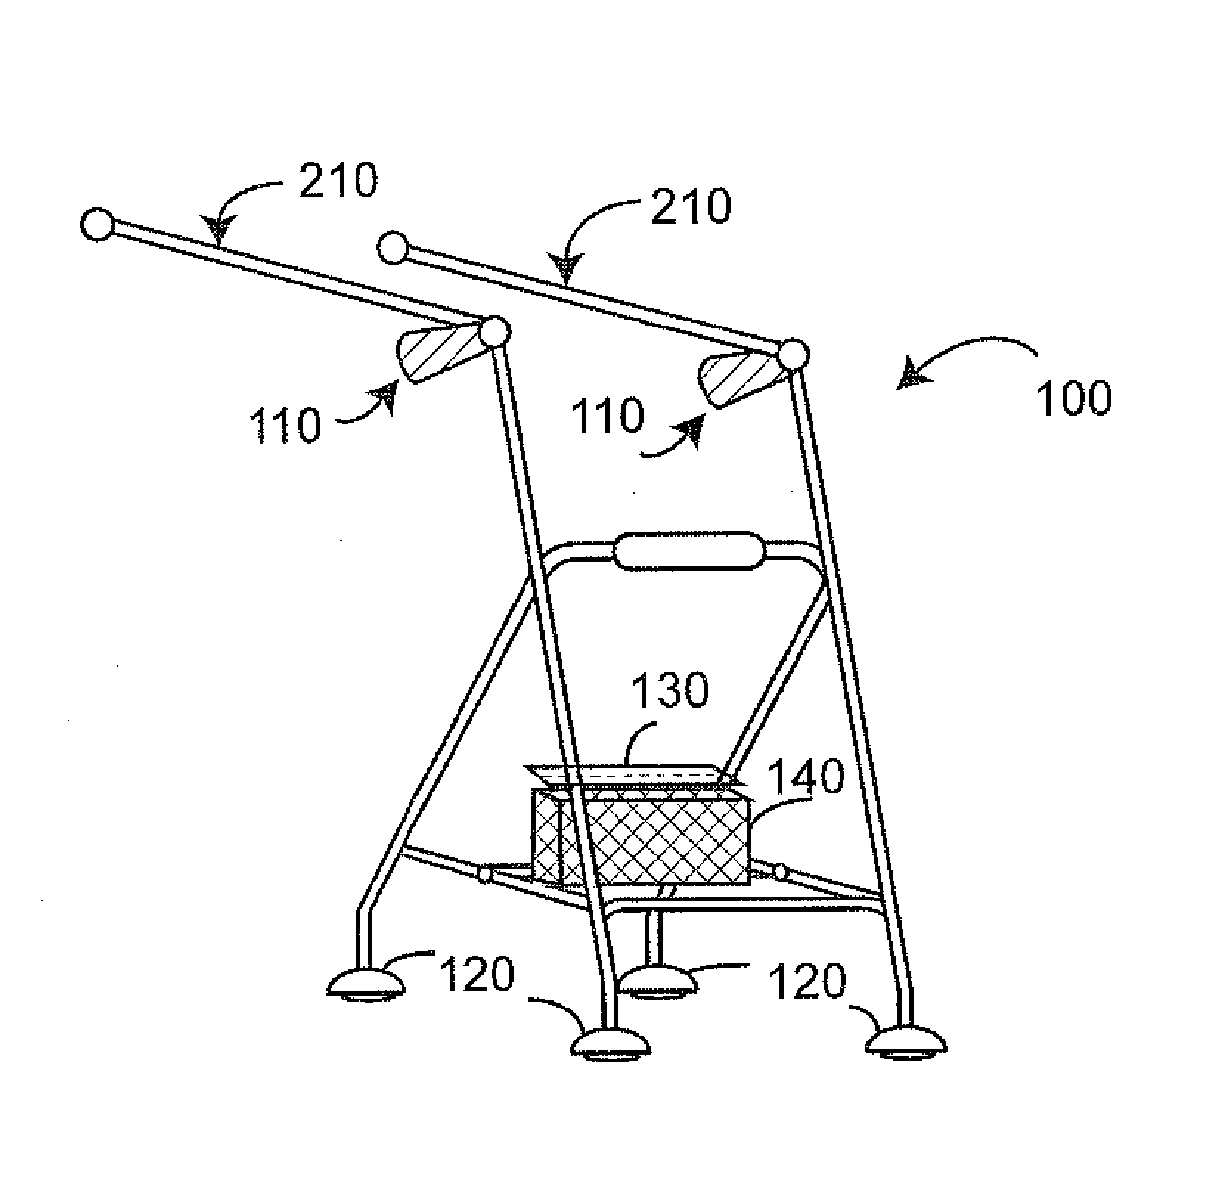 Method and apparatus for assisting users of conventional stand alone walkers